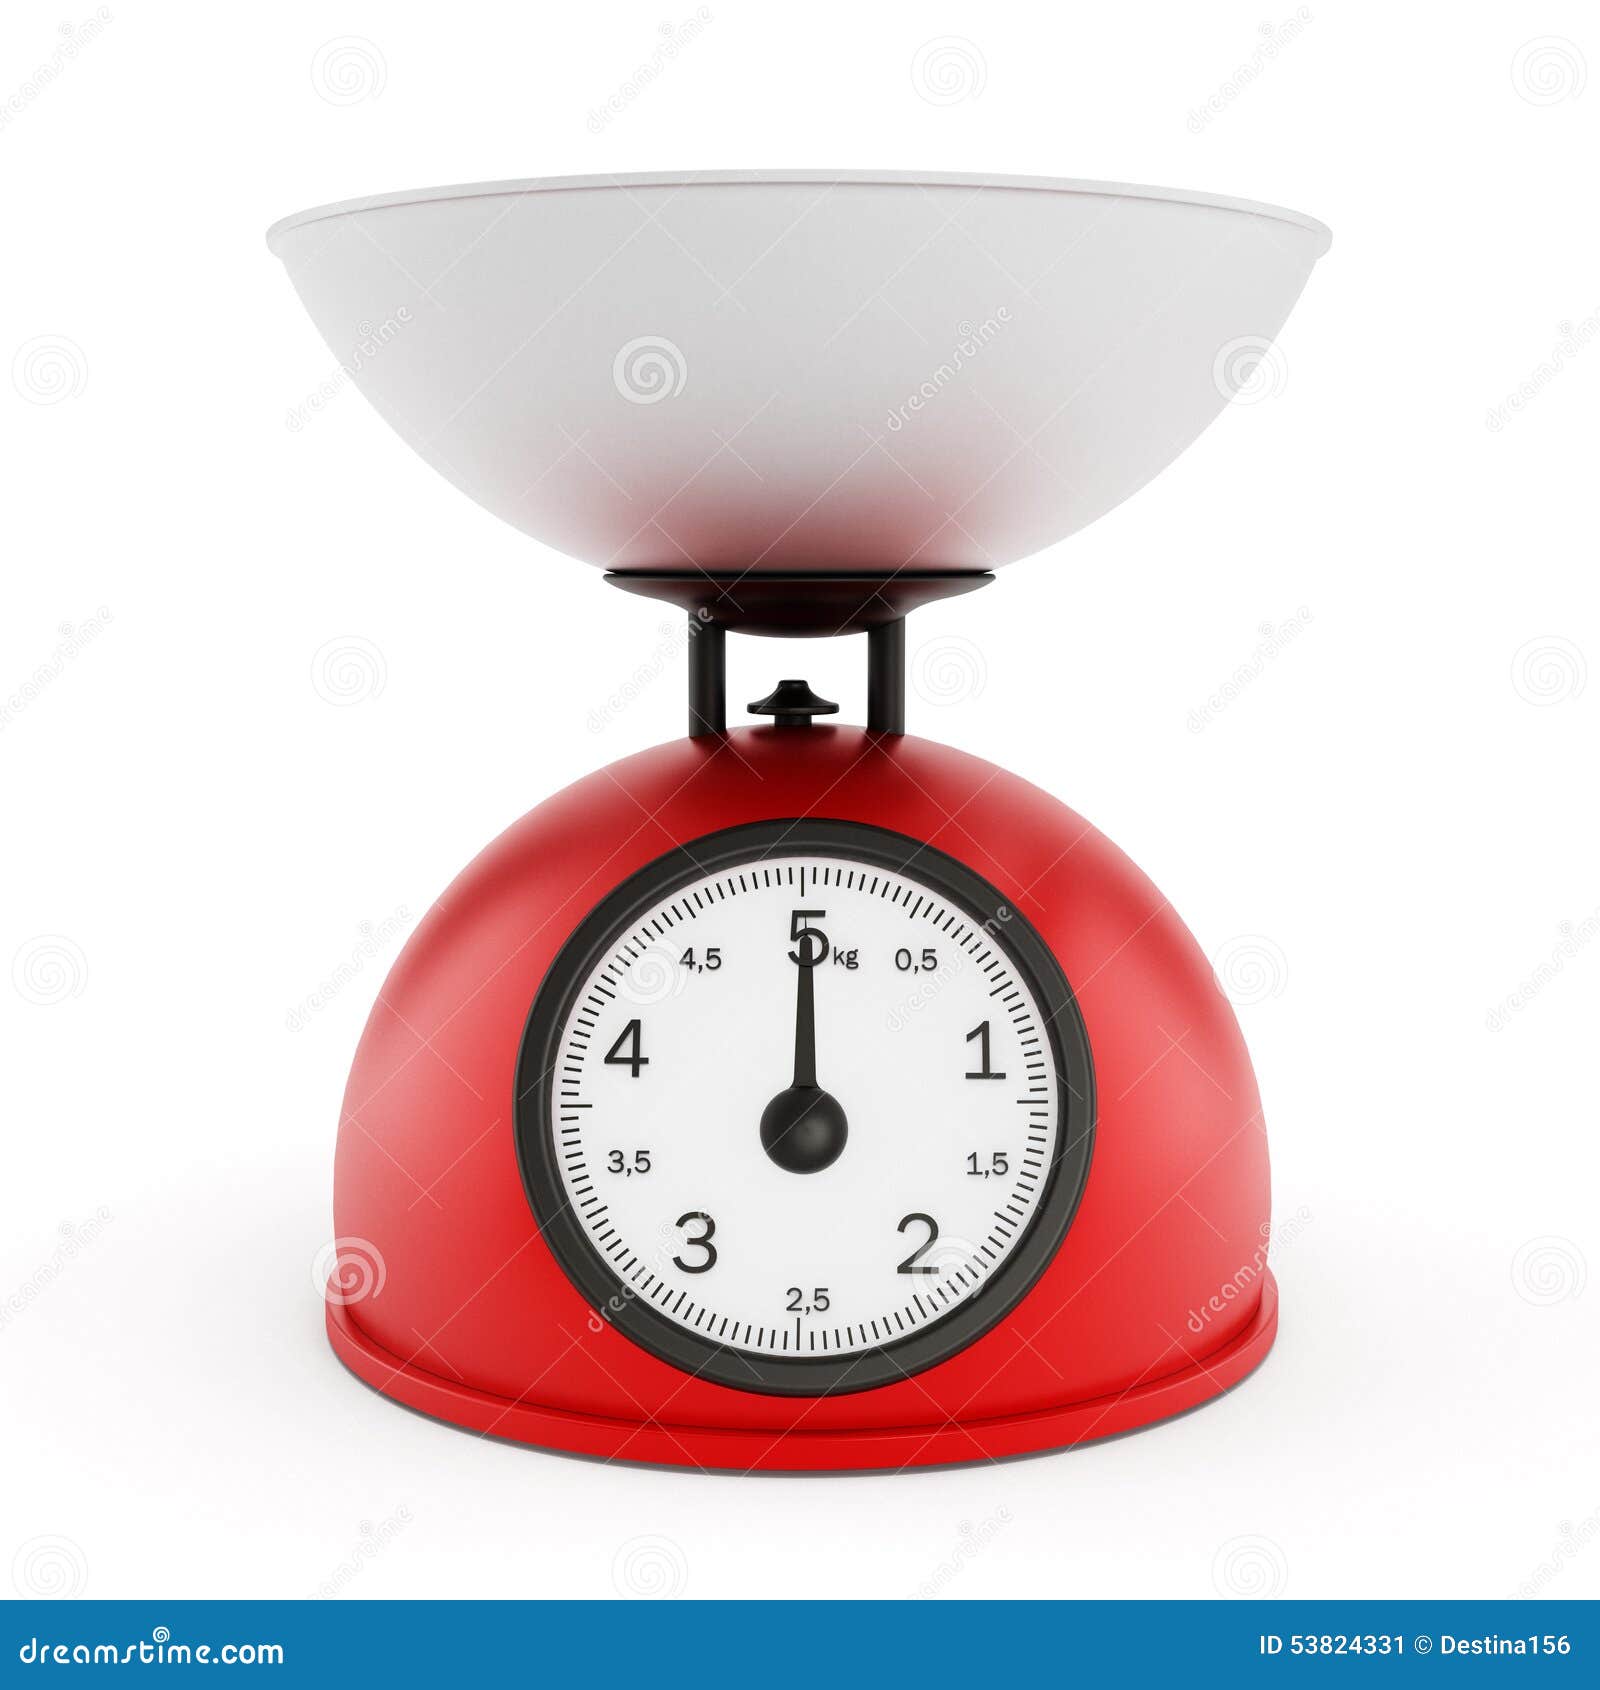 Set Of Green Kitchen Scales With Red Arrow Pointing To 150 Stock Photo -  Download Image Now - iStock